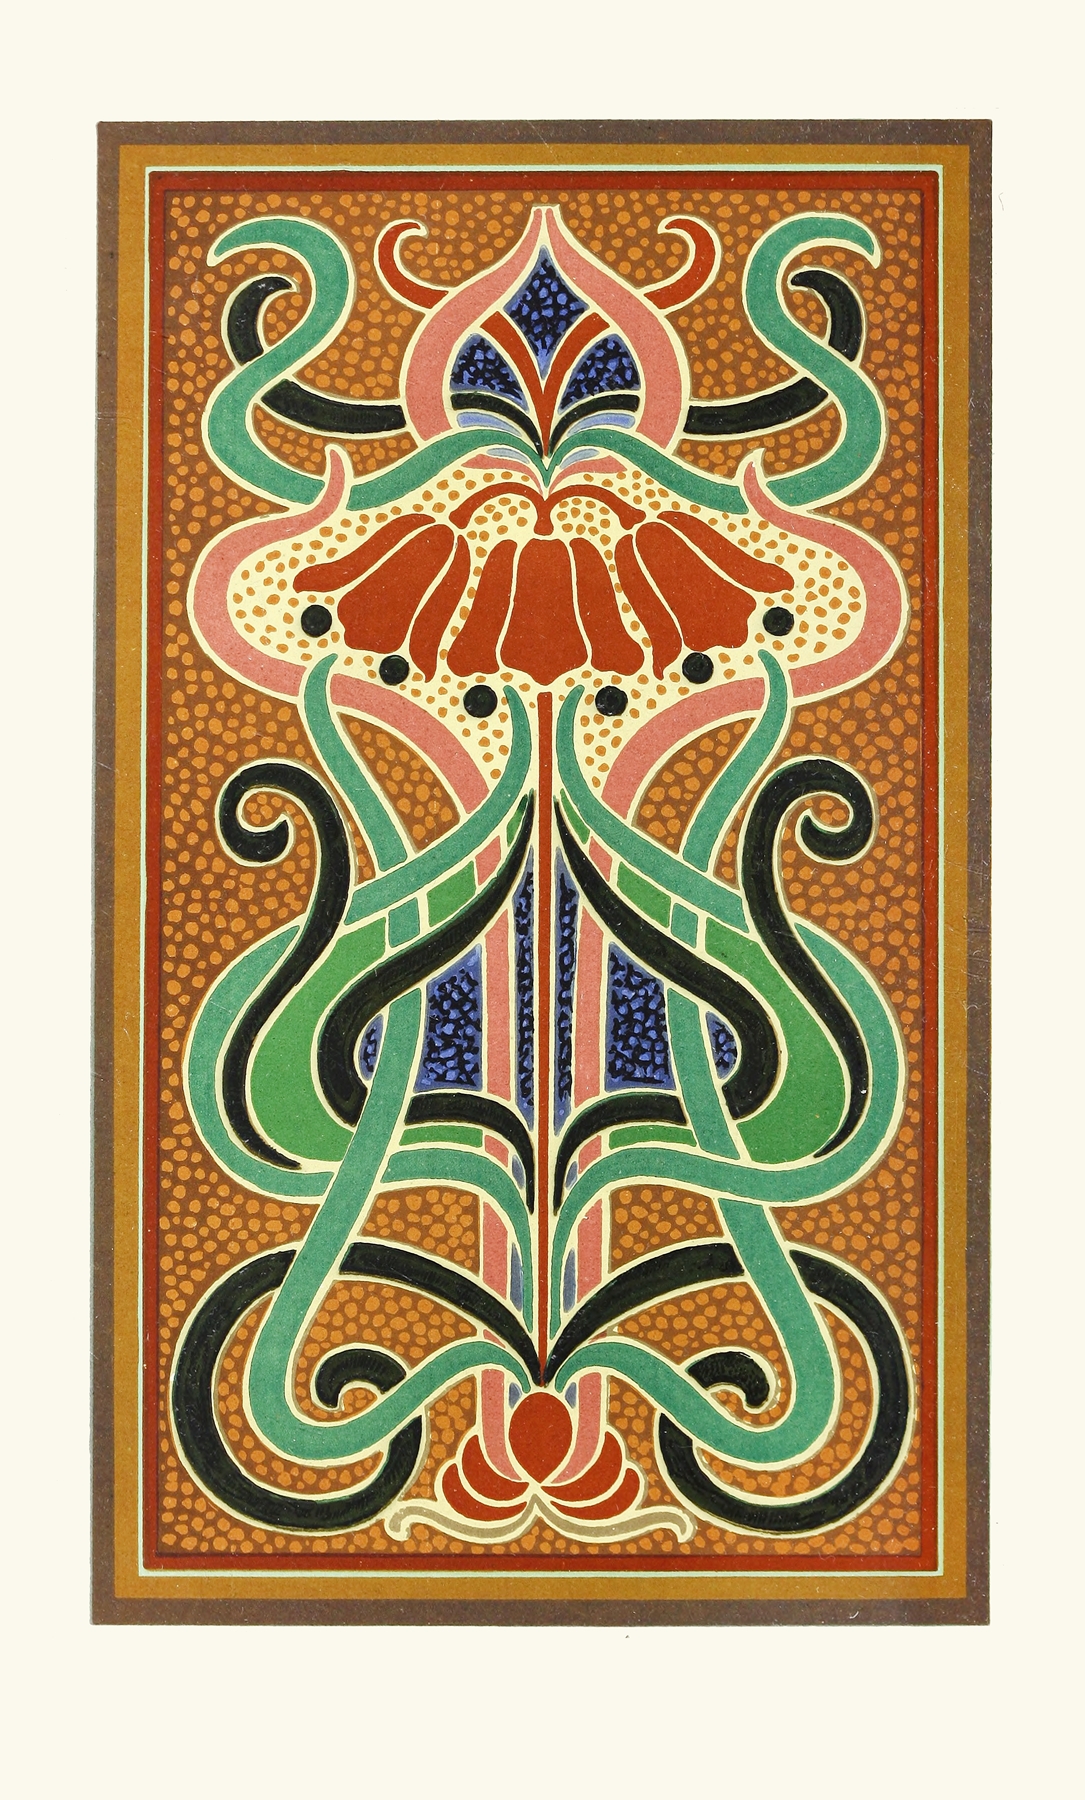 Design showing Analysis of Colour in a ‘Peacock’s Plumage’ 썸네일